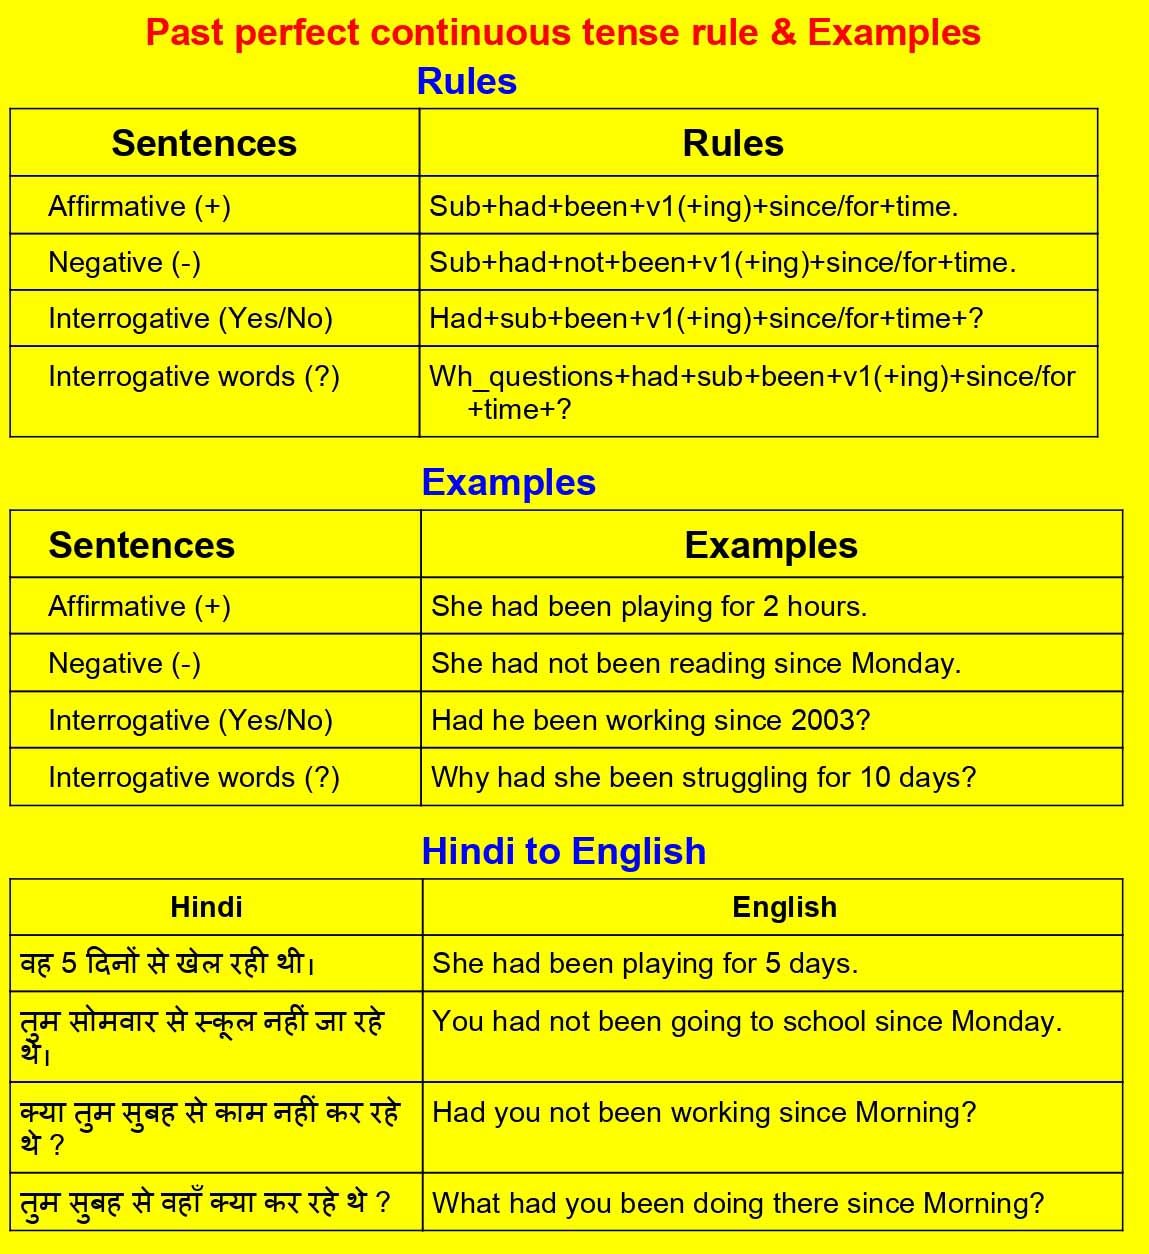 past-perfect-continuous-tense-in-hindi-rules-examples-and-definition